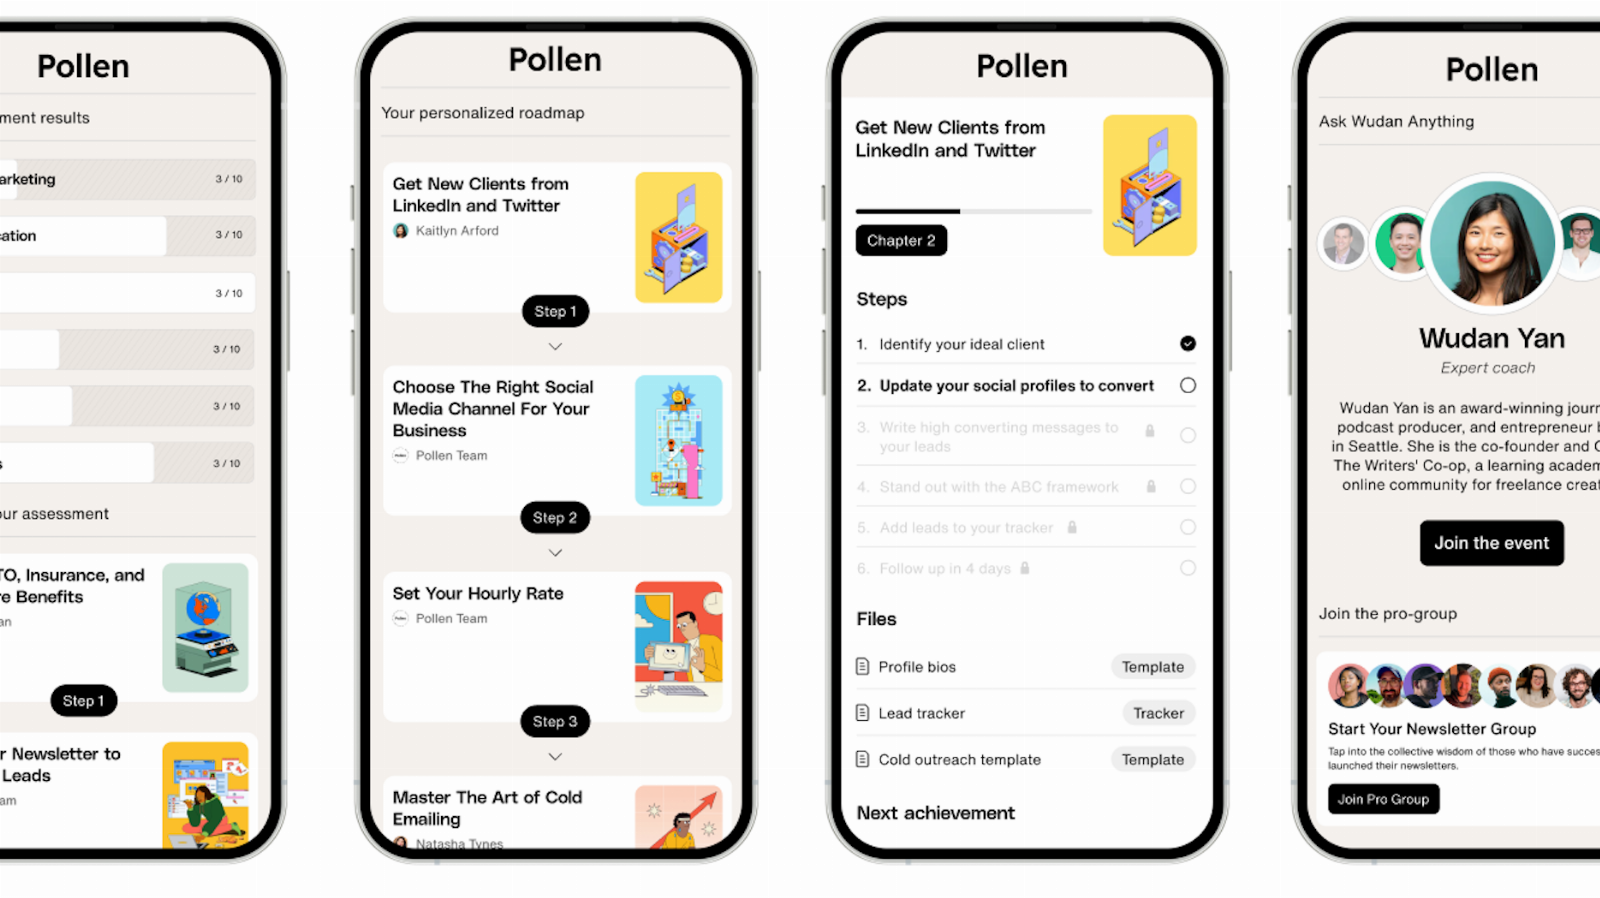 Pollen’s approach to setting freelancers up for success is nothing to sneeze at